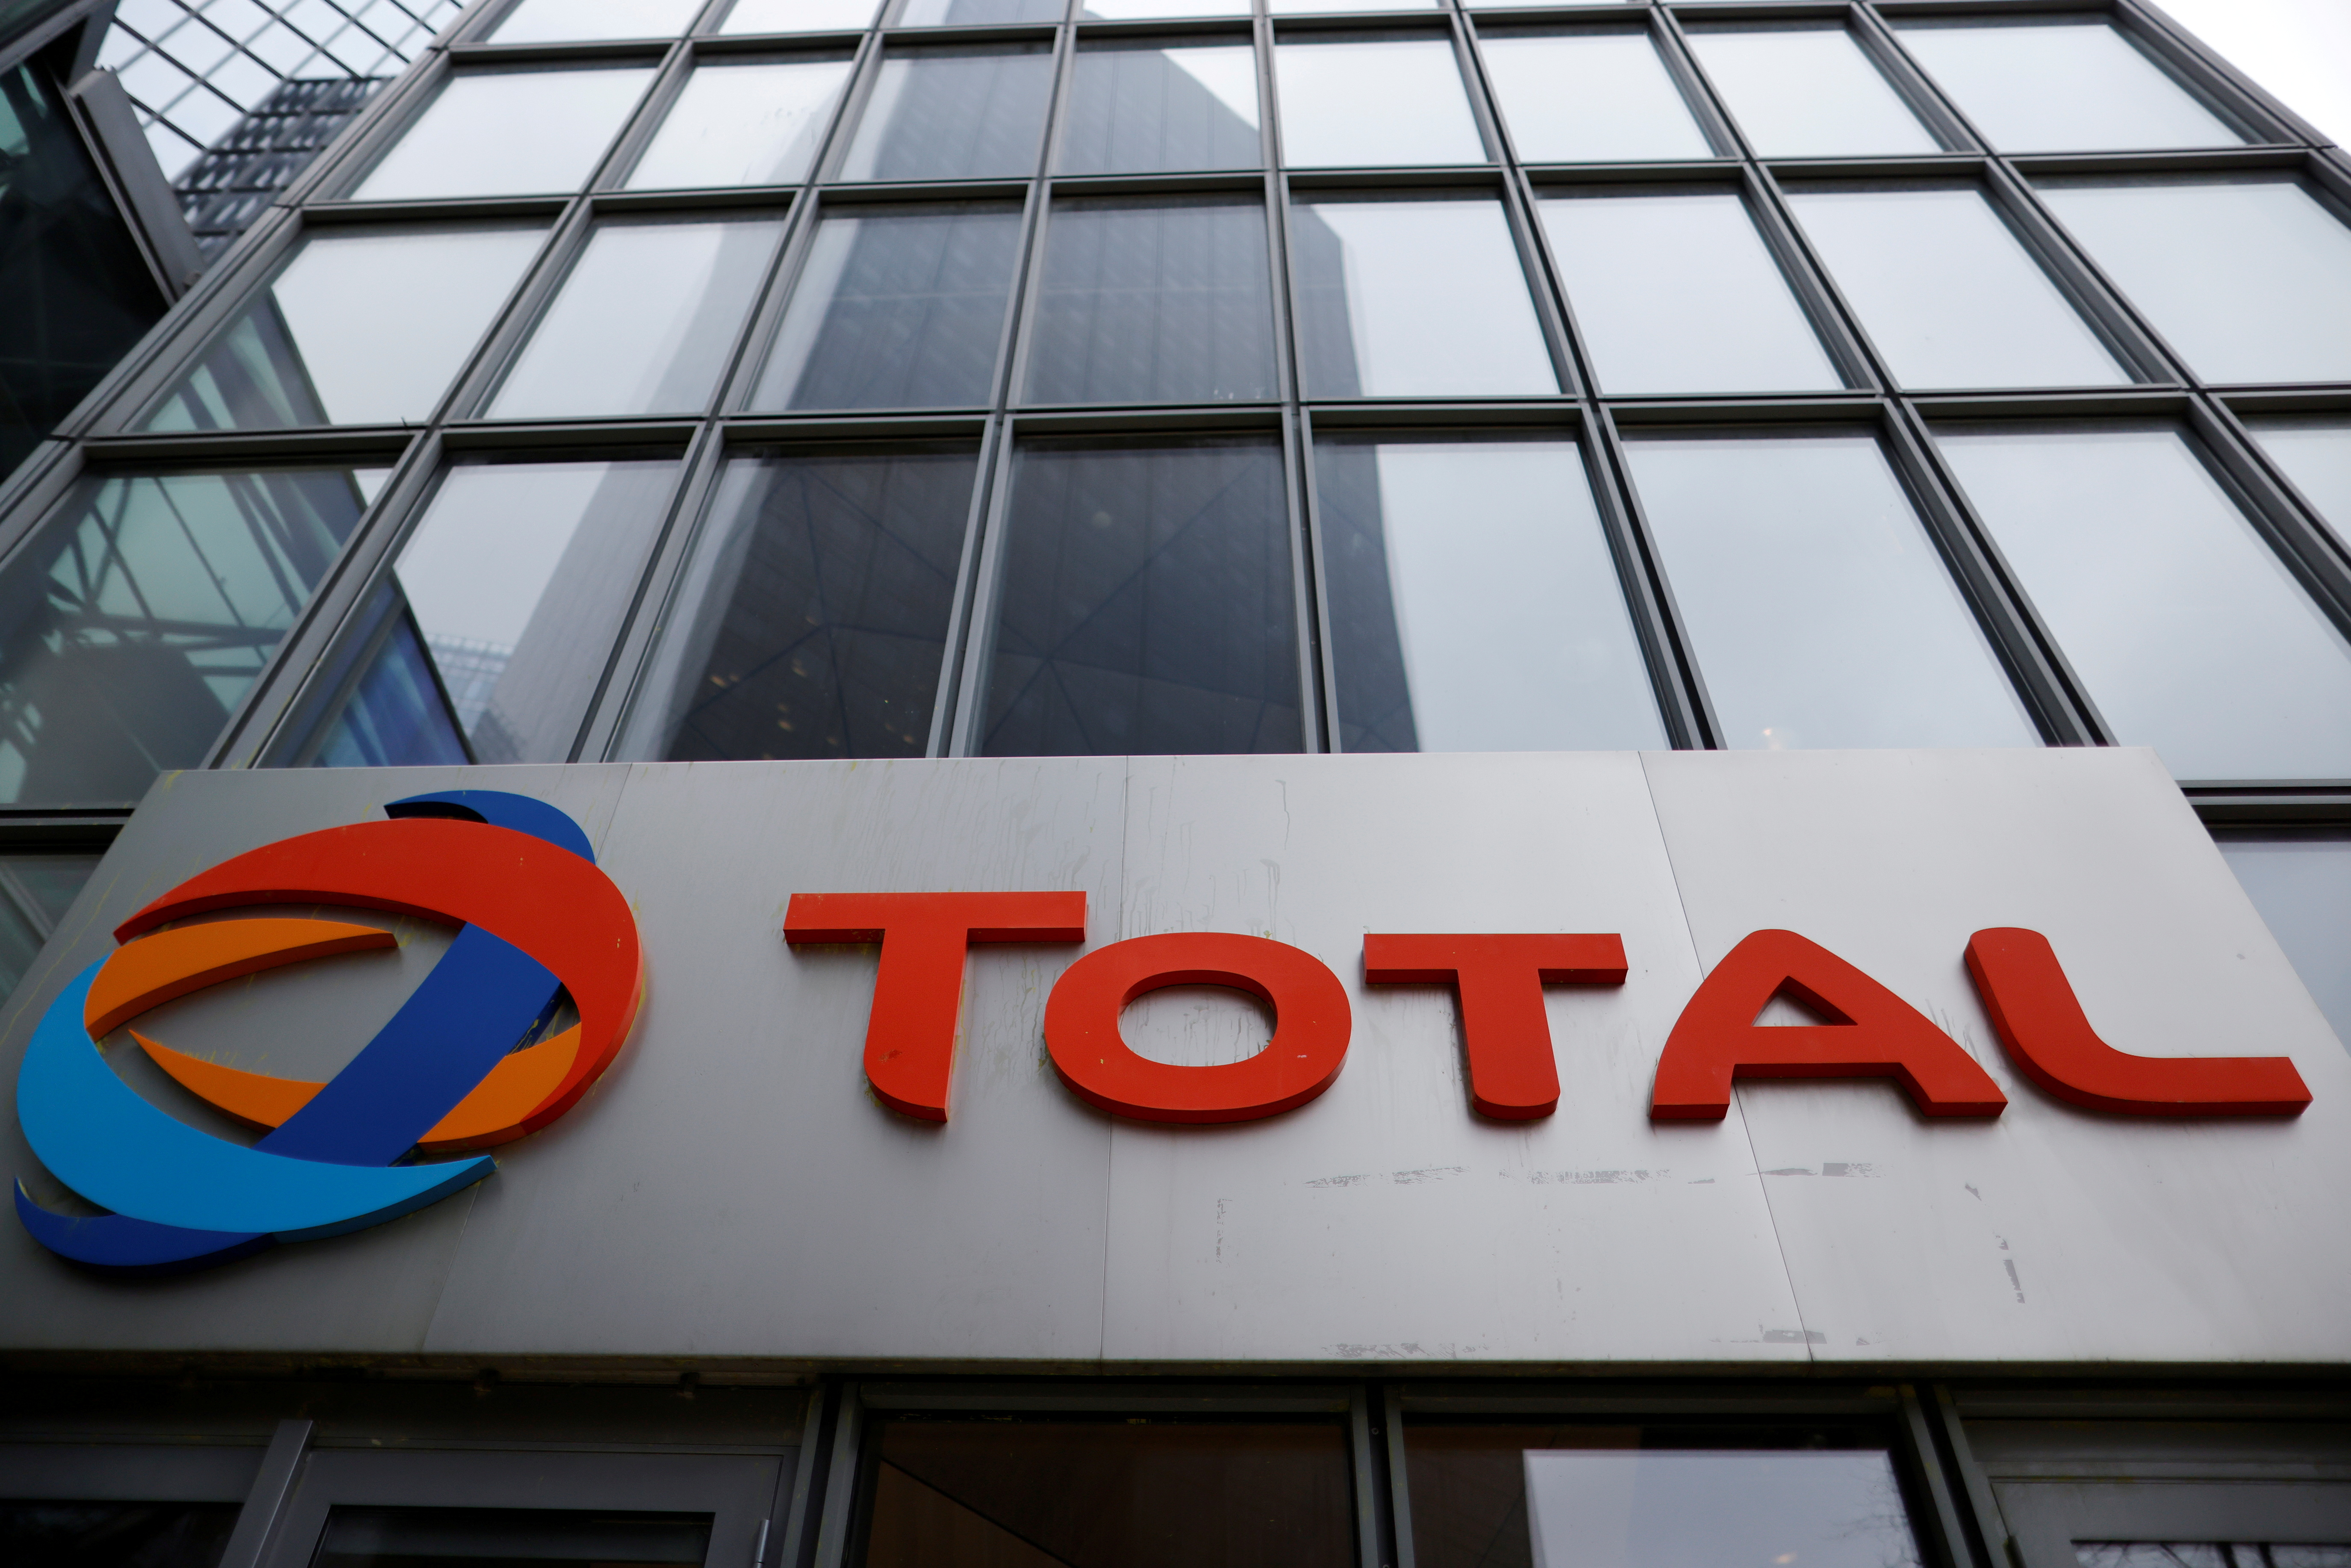 The logo of French oil and gas company Total is seen at La Defense business district in Courbevoie near Paris, France, February 8, 2021. REUTERS/Sarah Meyssonnier/File Photo